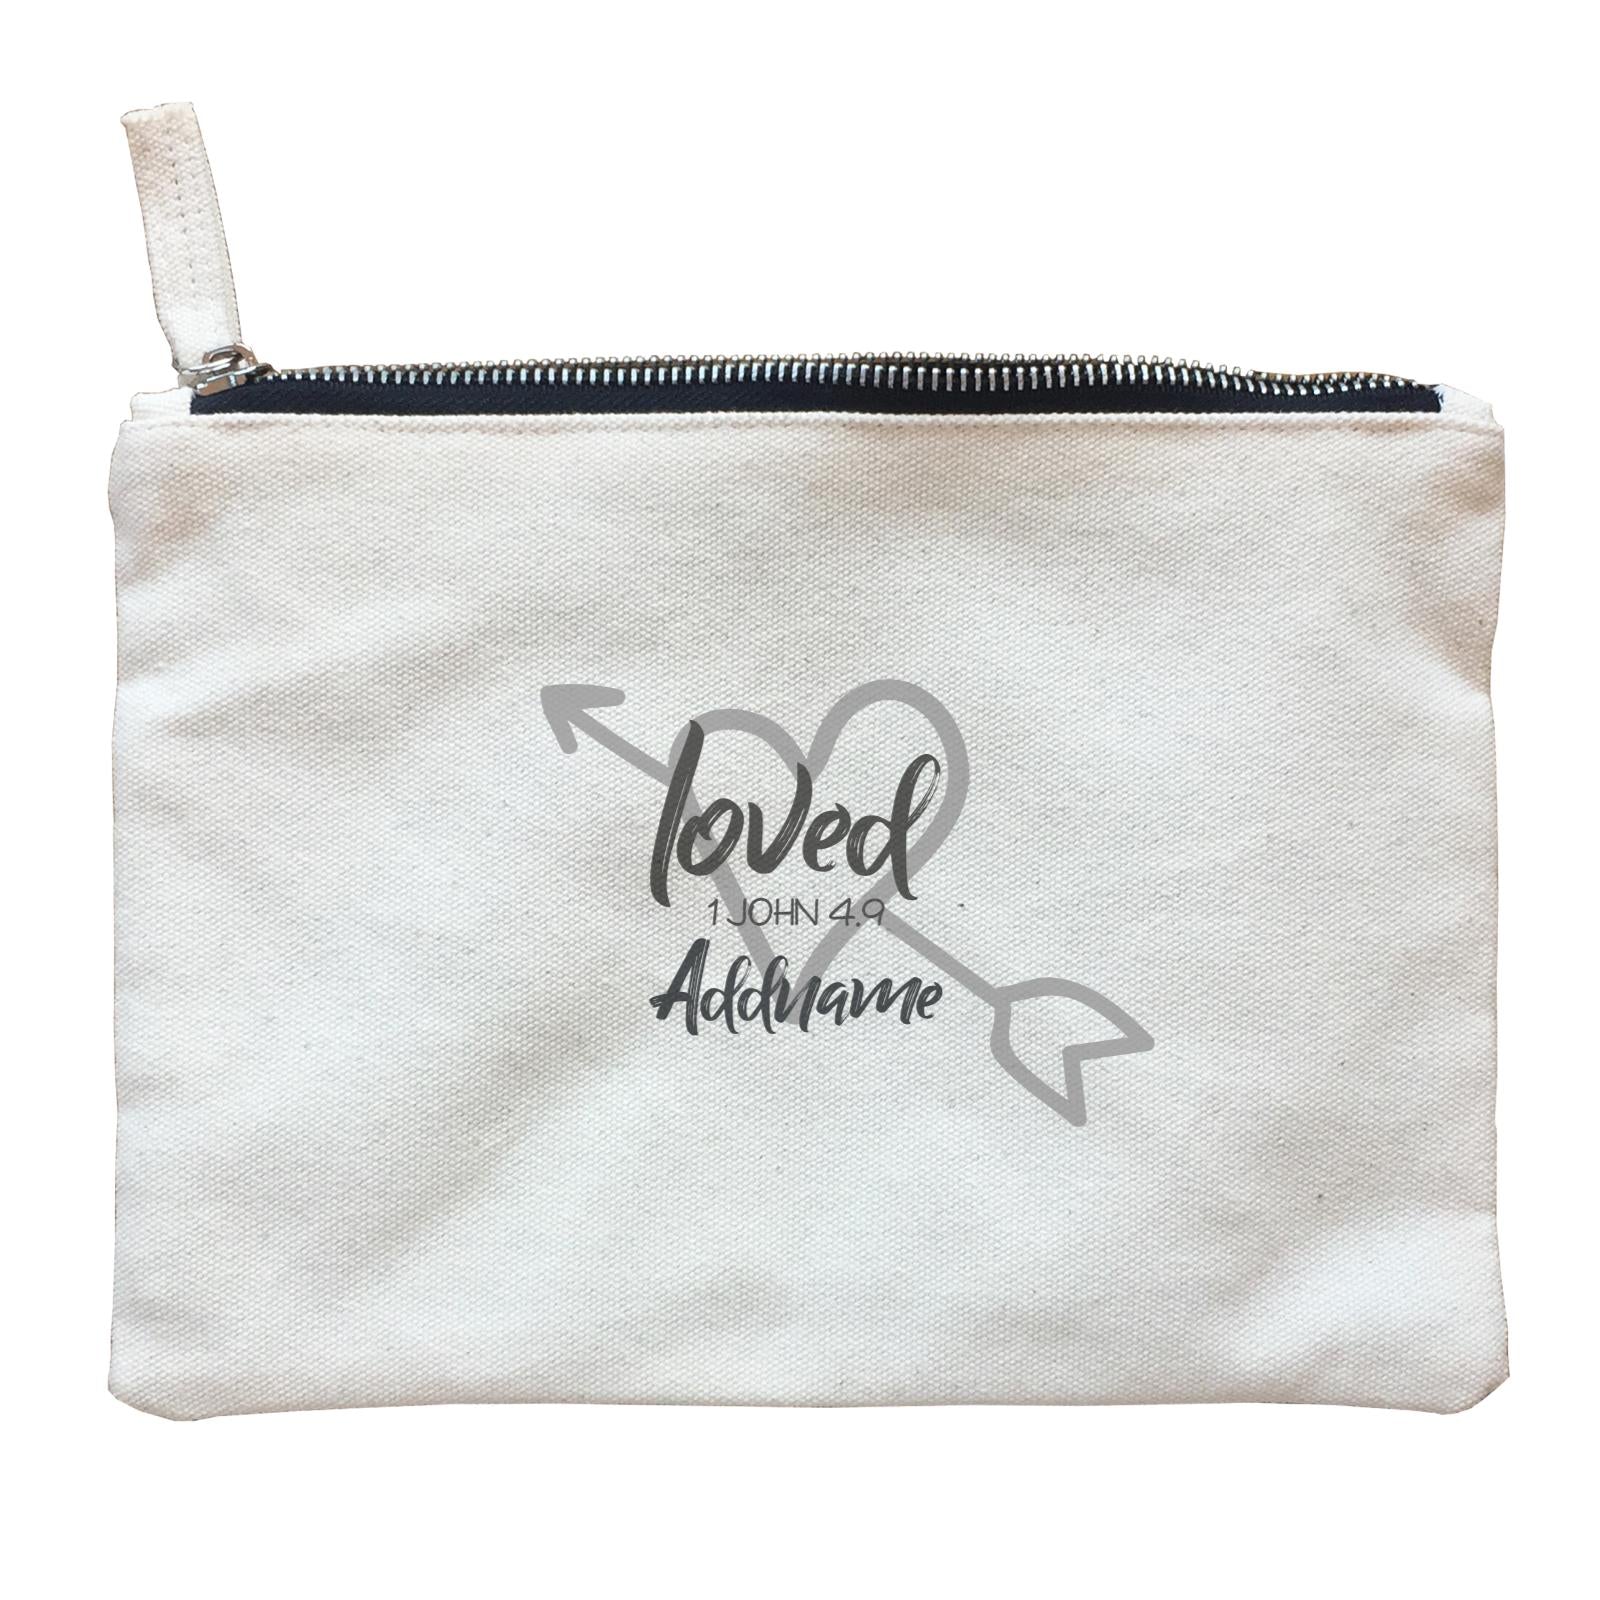 Loved Family Loved With Heart And Arrow 1 John 4.9 Addname Accessories Zipper Pouch